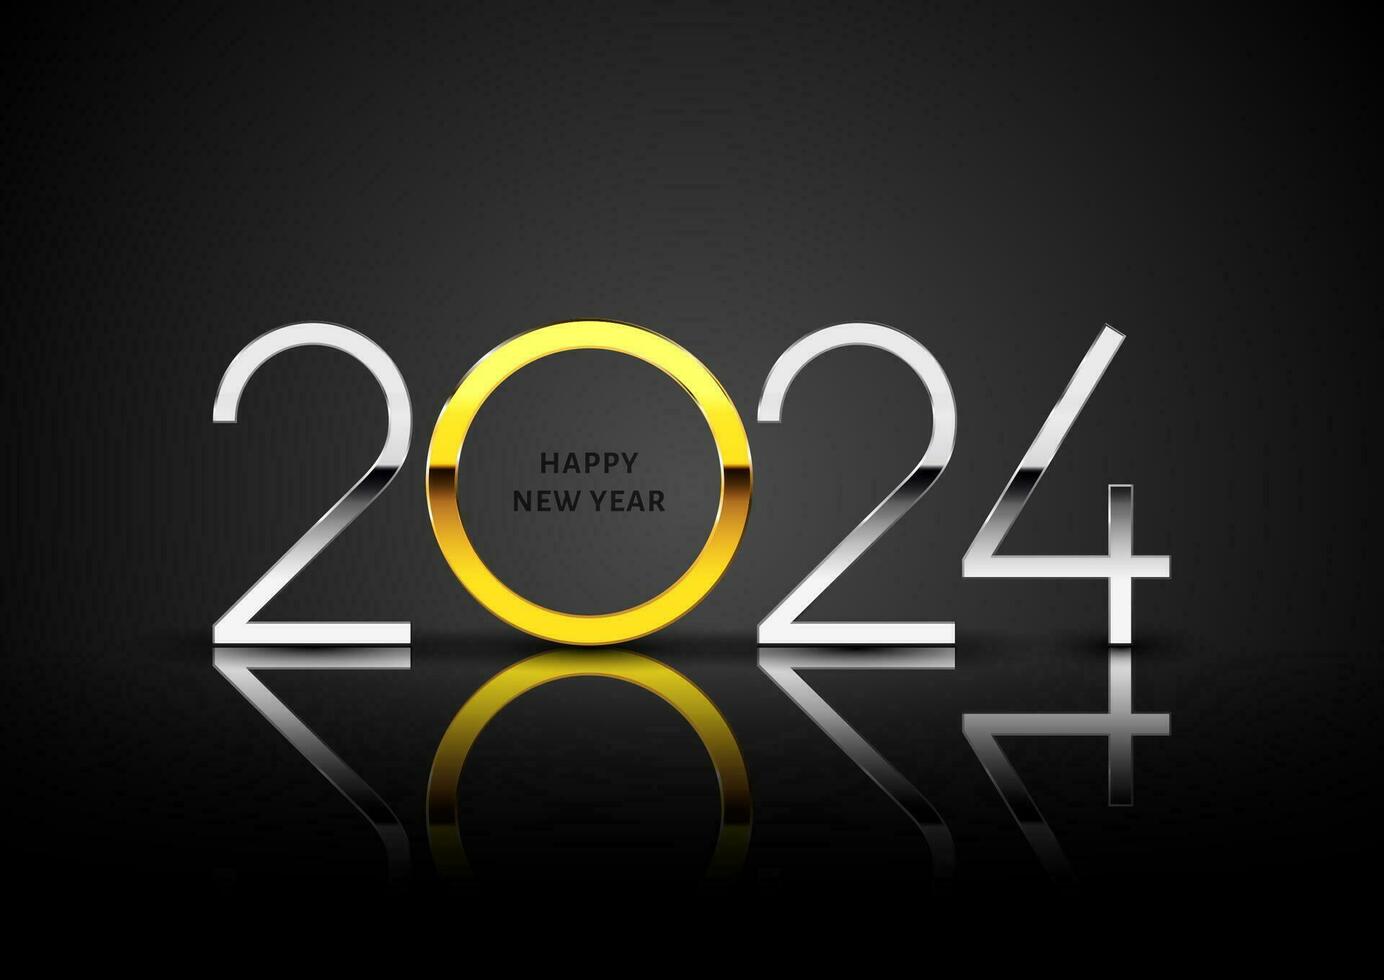 elegant silver and gold Happy New Year background vector